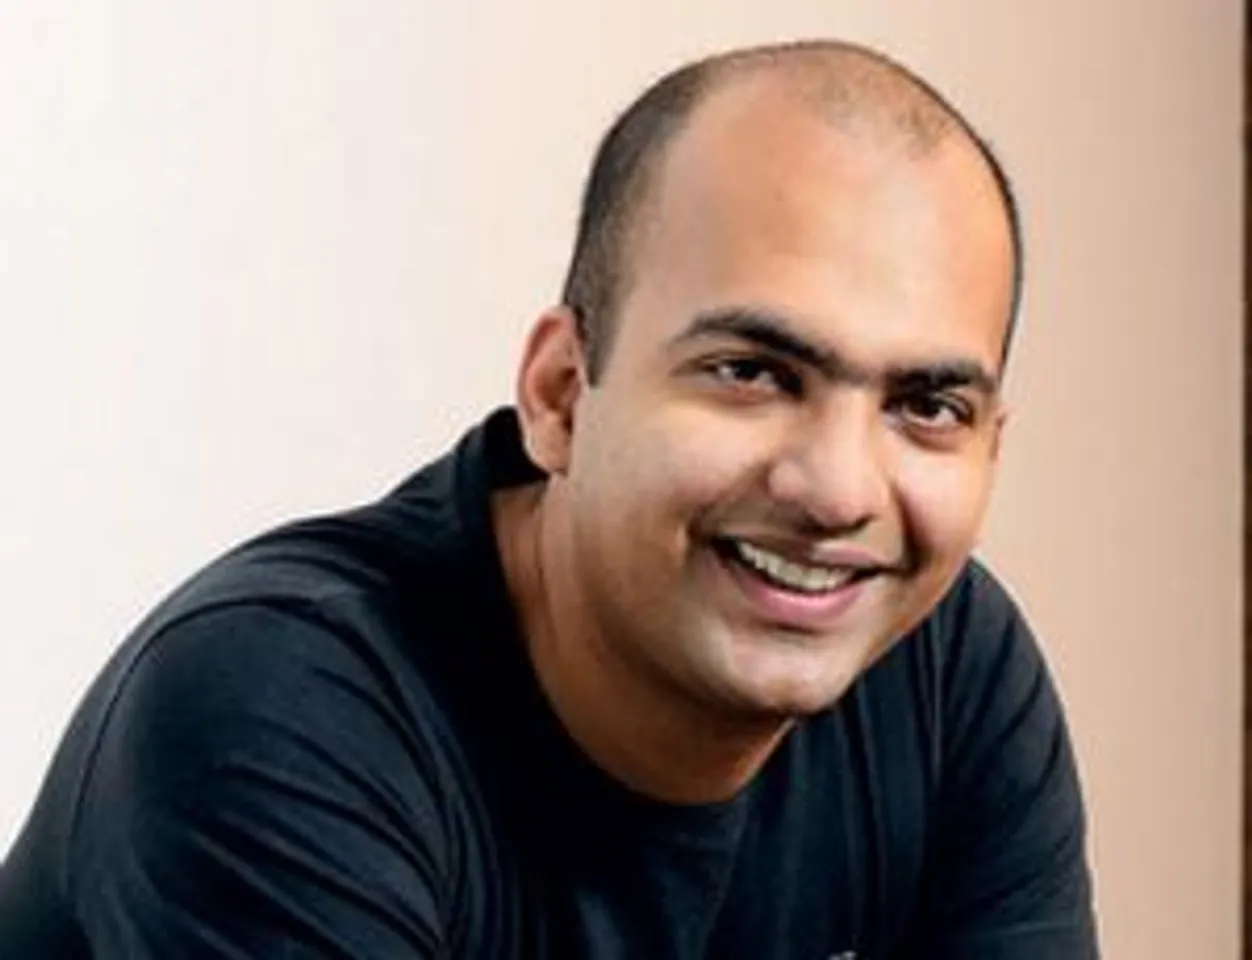 Xiaomi India's Manu Jain Declined The Rumours of Collecting Users' Data Without Their Consent